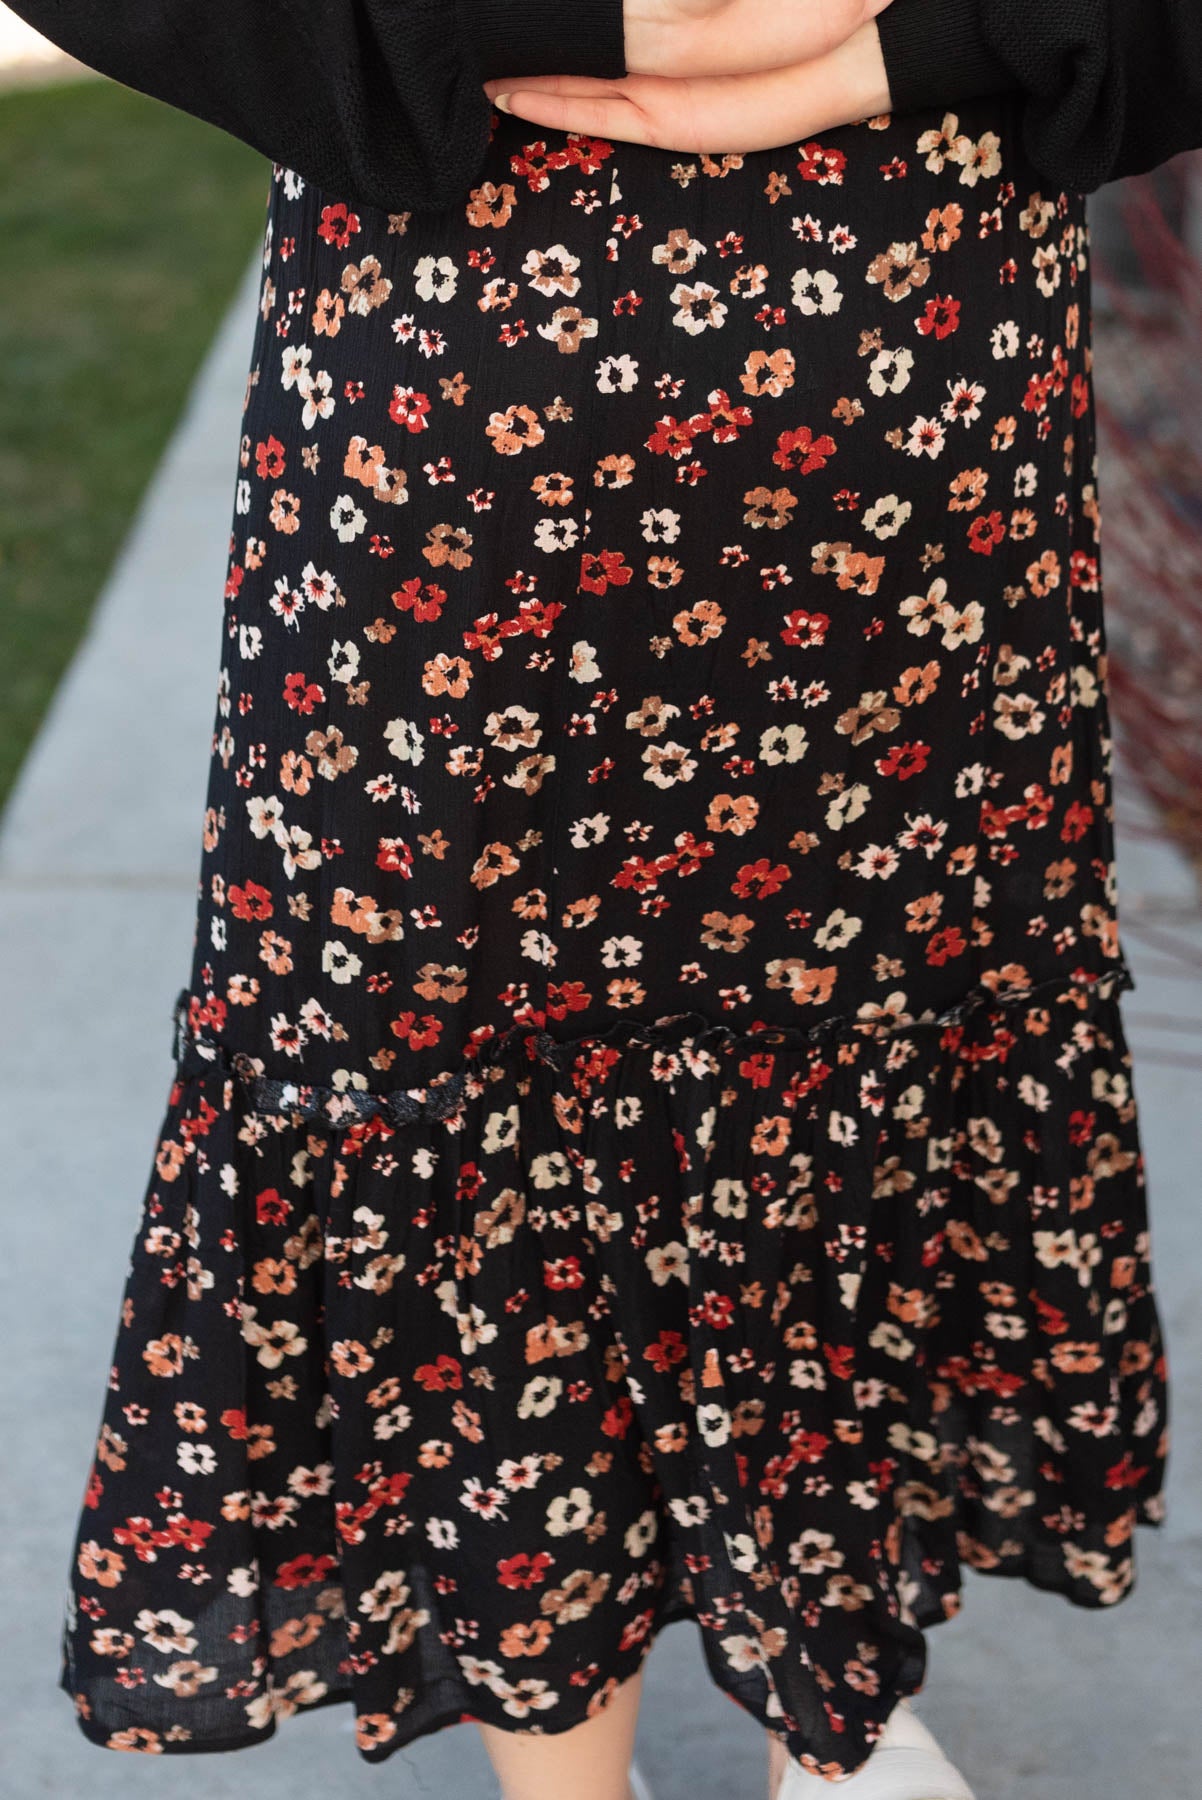 Back view of a black floral skirt